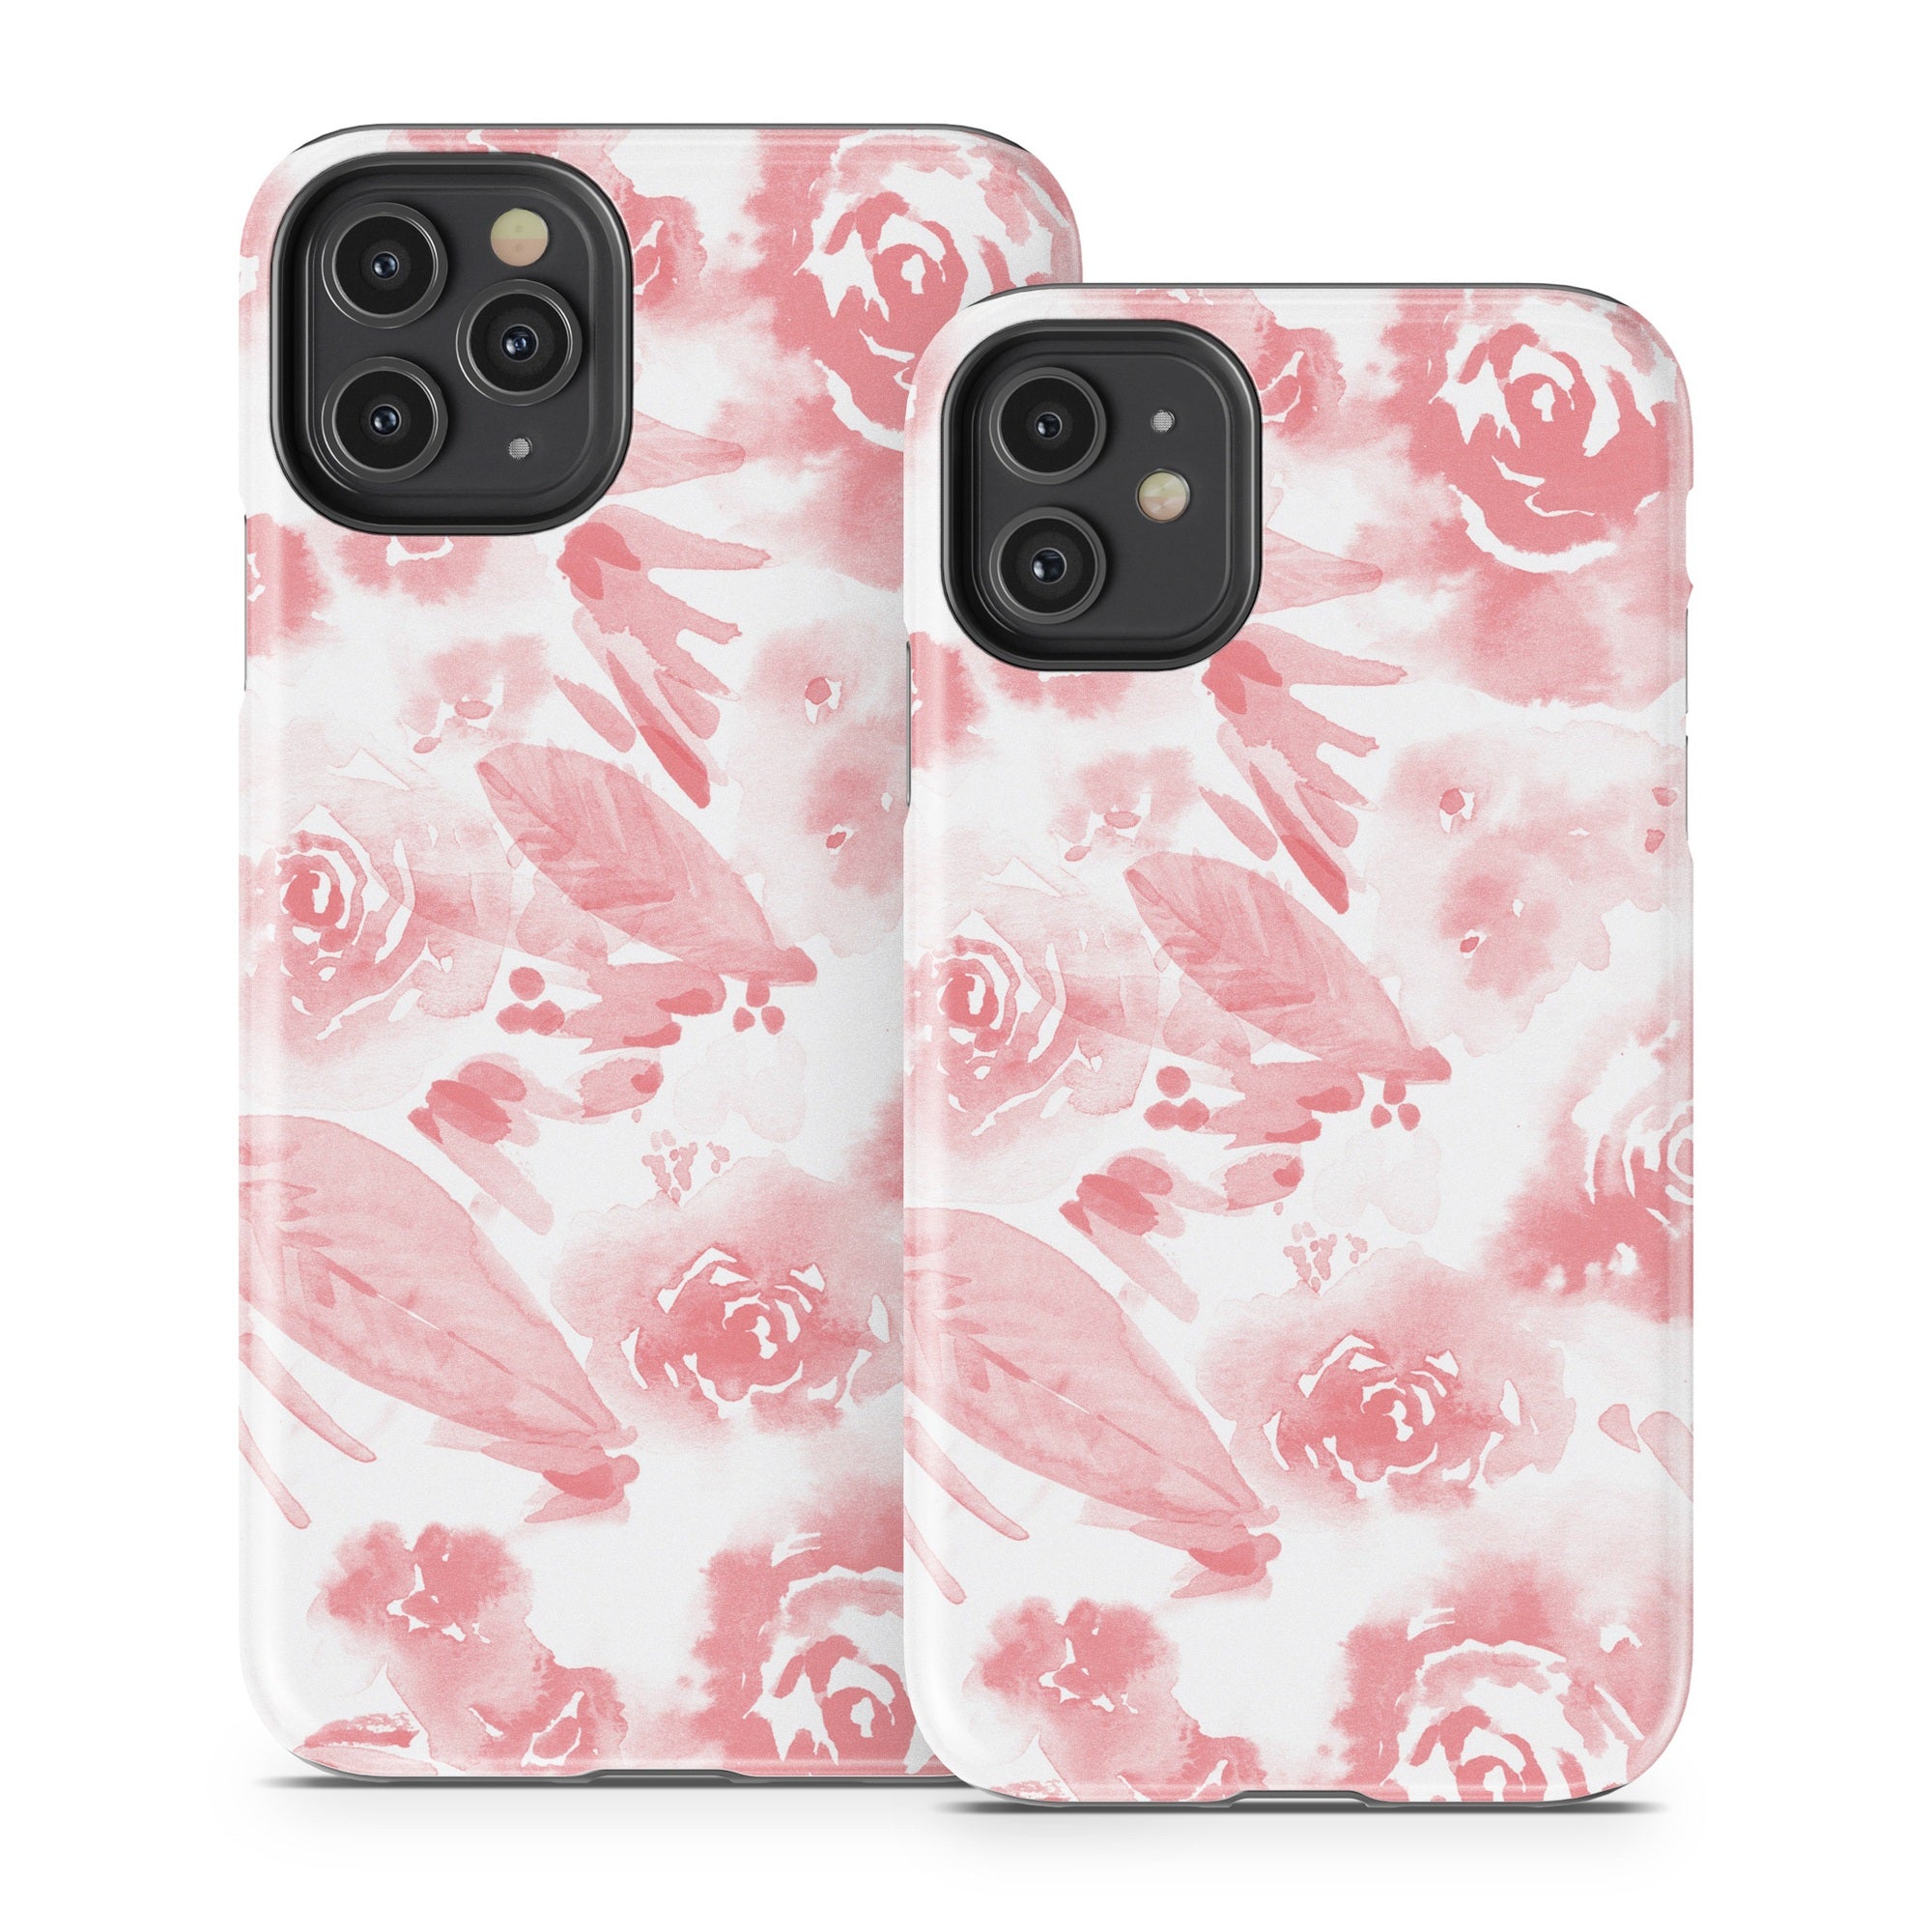 Washed Out Rose - Apple iPhone 11 Tough Case